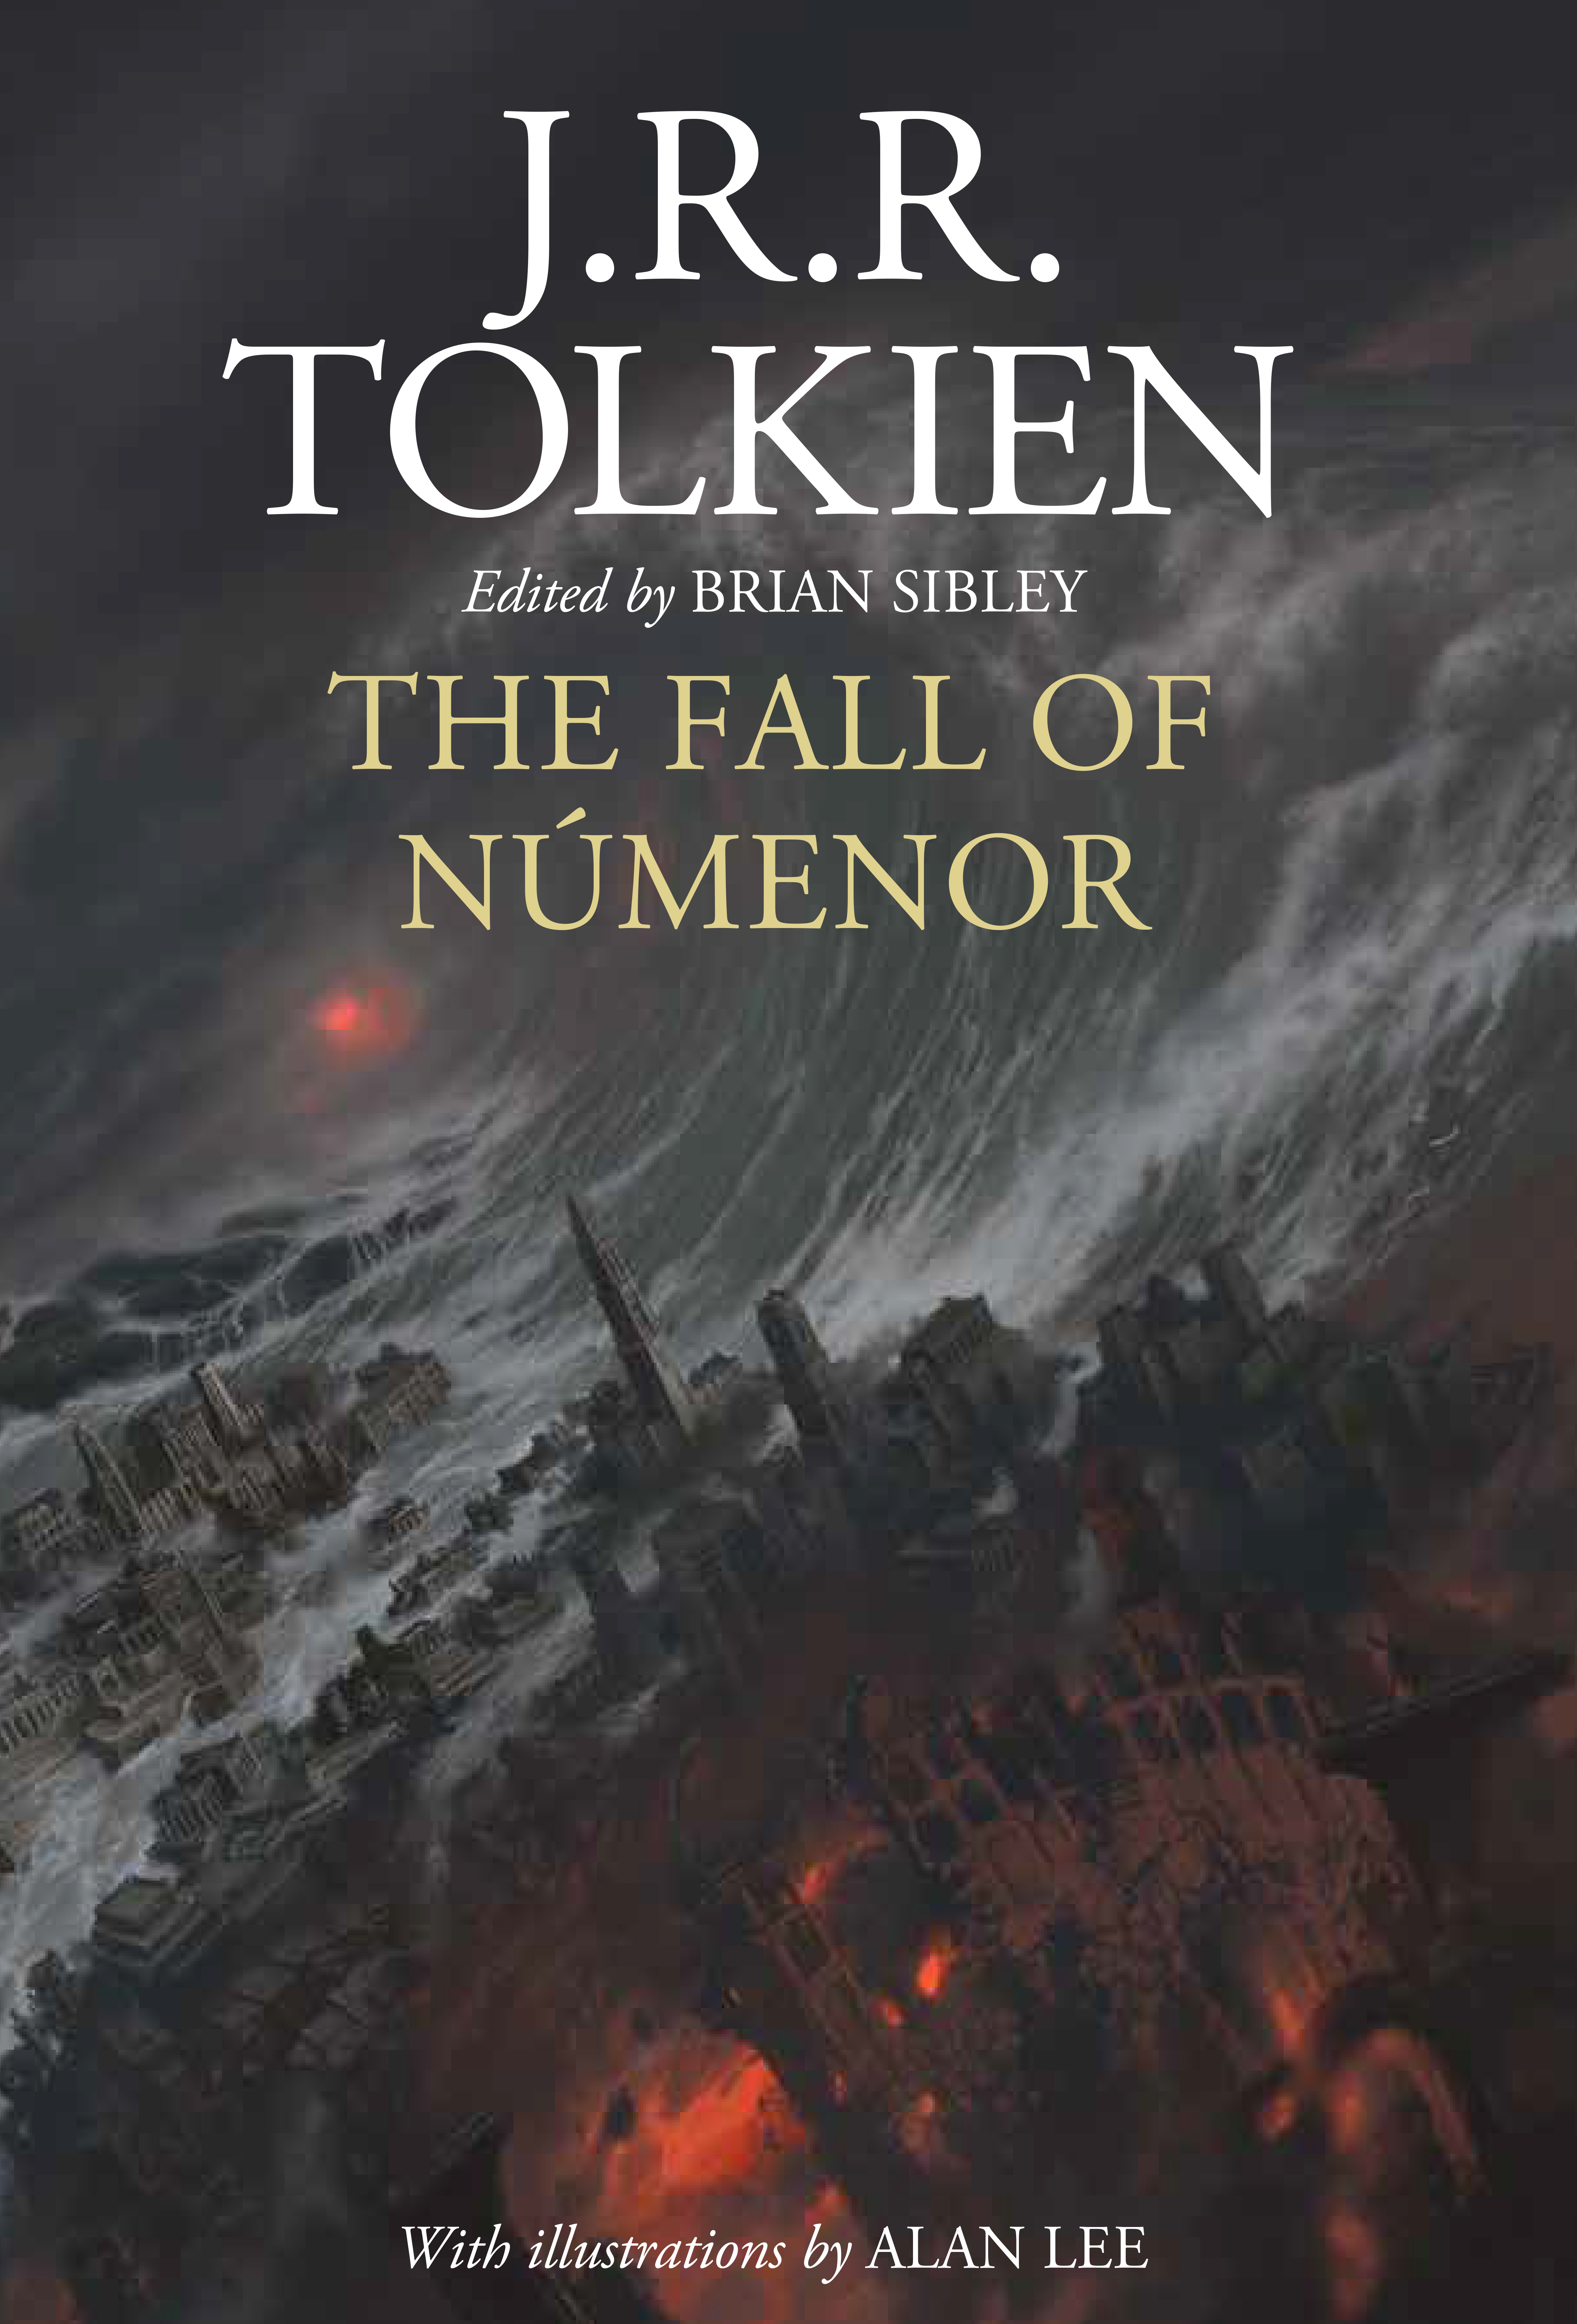 The Fall of Númenor by J.R.R. Tolkien, edited by Brian Sibley. Cover by Alan Lee